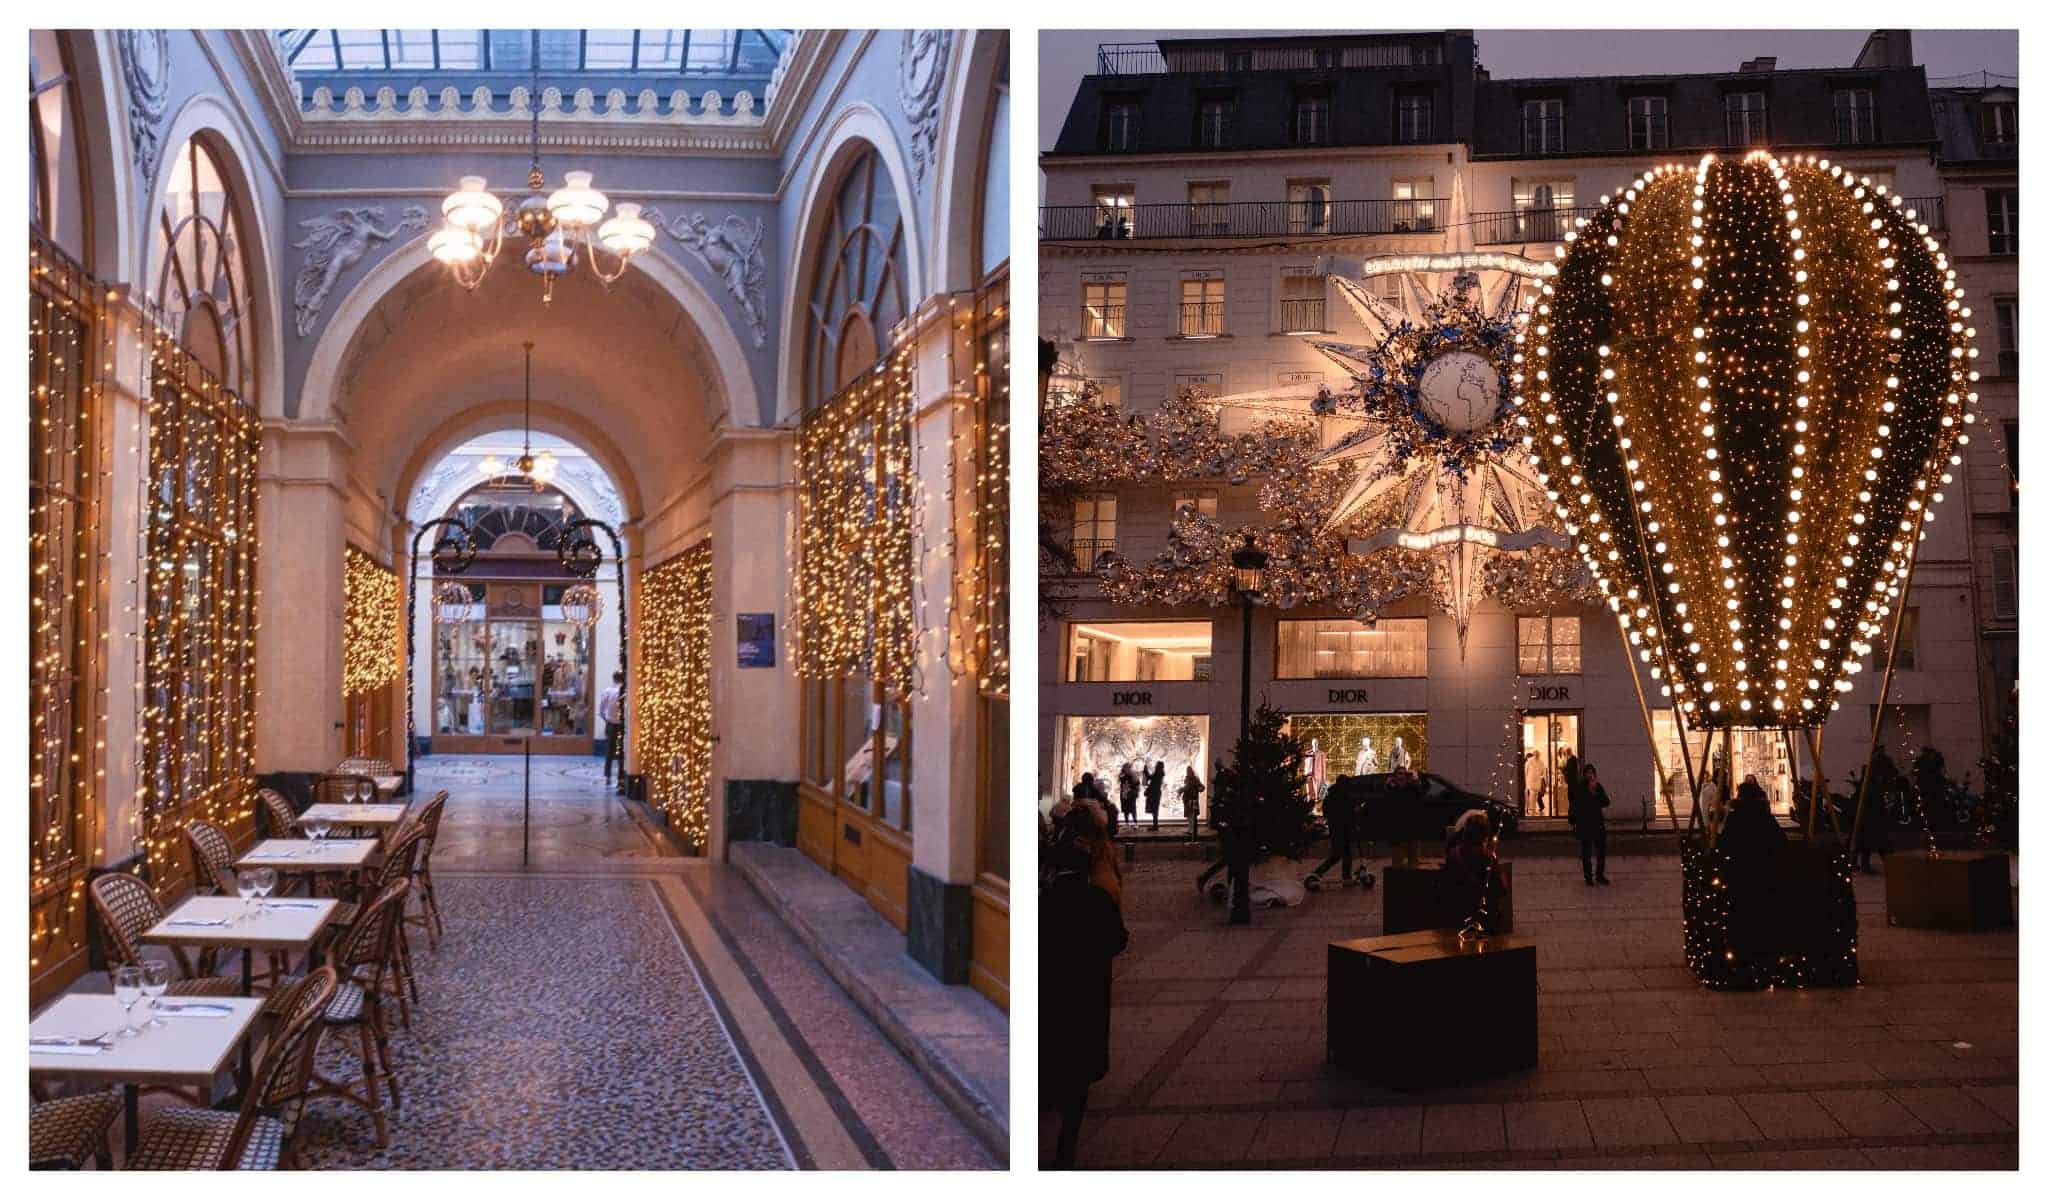 left: galeries vivienne decorated with string lights for Christmas, right: dior paris decorated with elaborate Christmas lights and fixtures